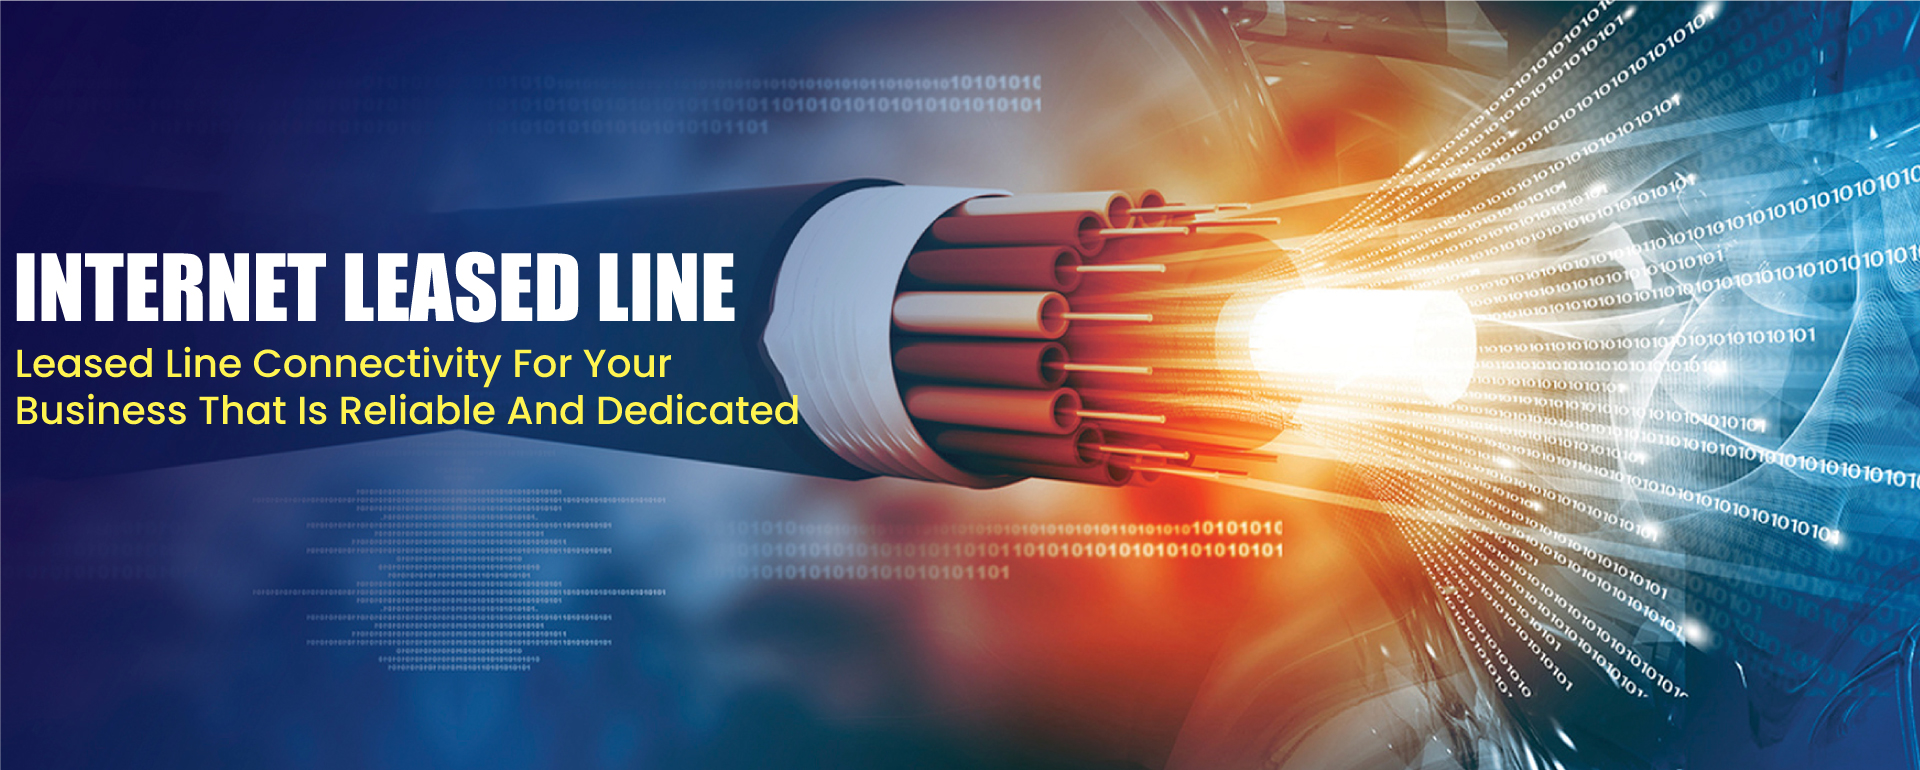 Internet Lease line Connectivity for Your Business